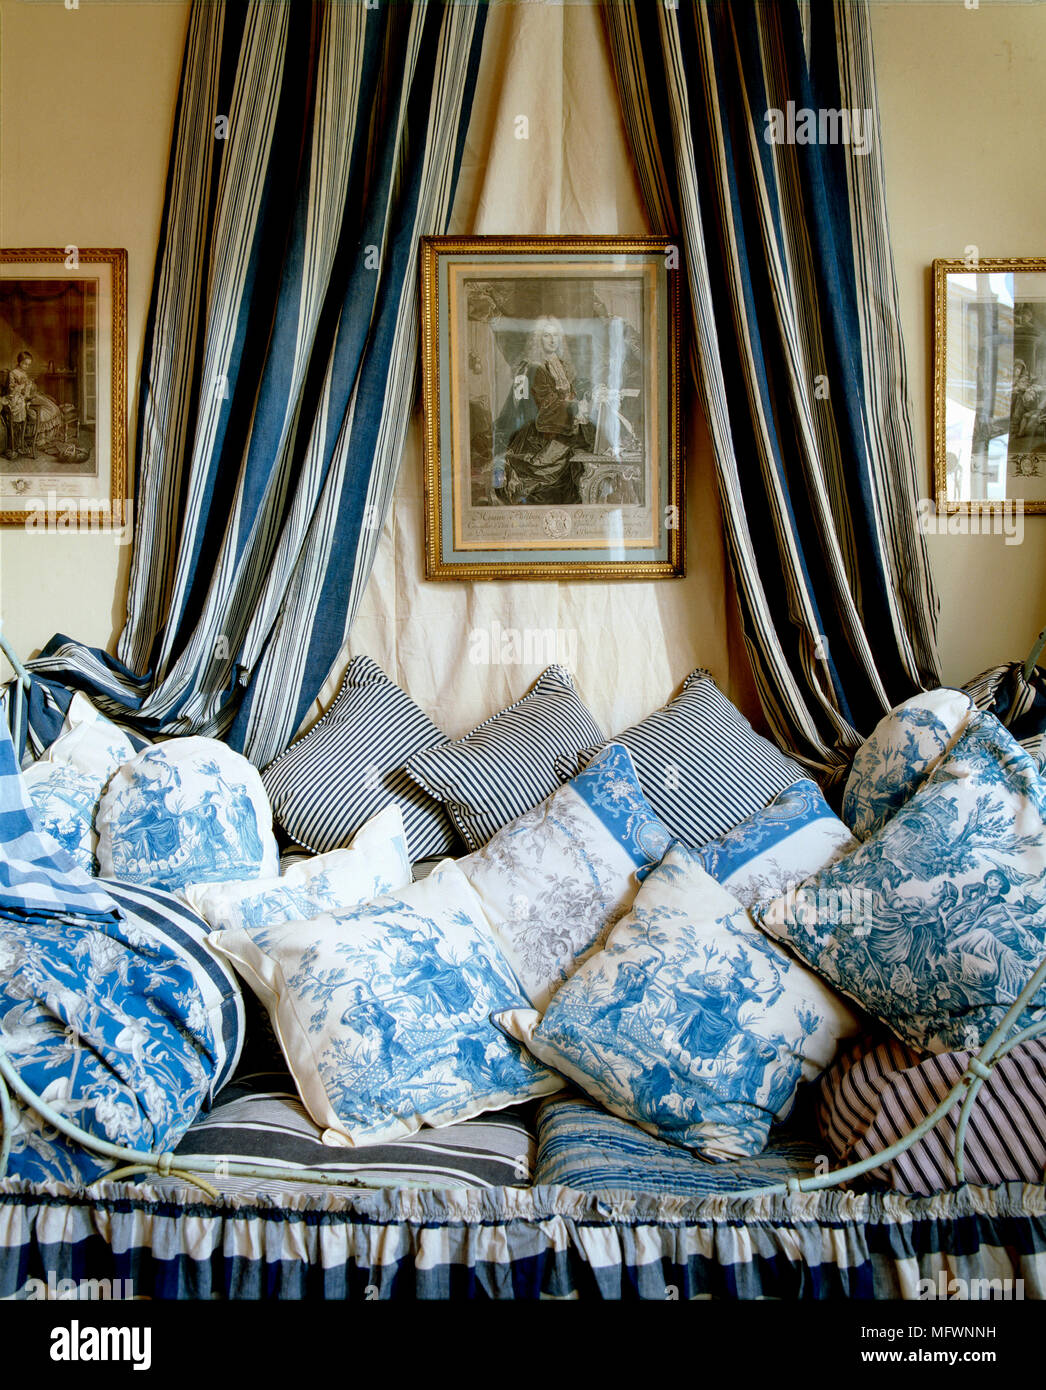 A detail of a grand, opulent bedroom, an antique metal framed bed with valance and blue and white striped drapes, pile of cushions covered in Toile de Stock Photo